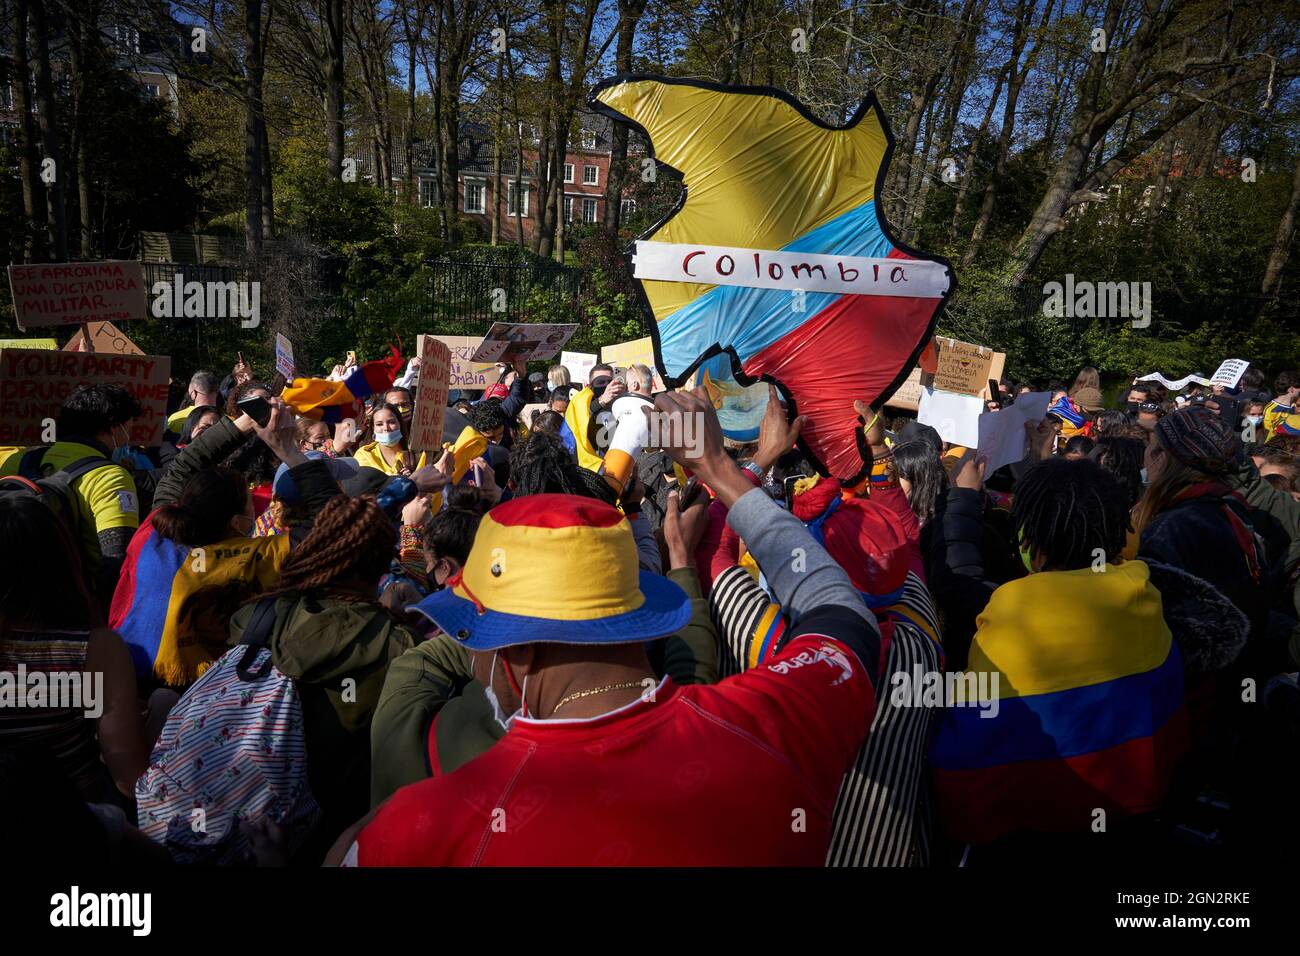 Colombian residents in the Netherlands protest in front of the Colombian embassy against the Colombian government's repression in that country. Stock Photo